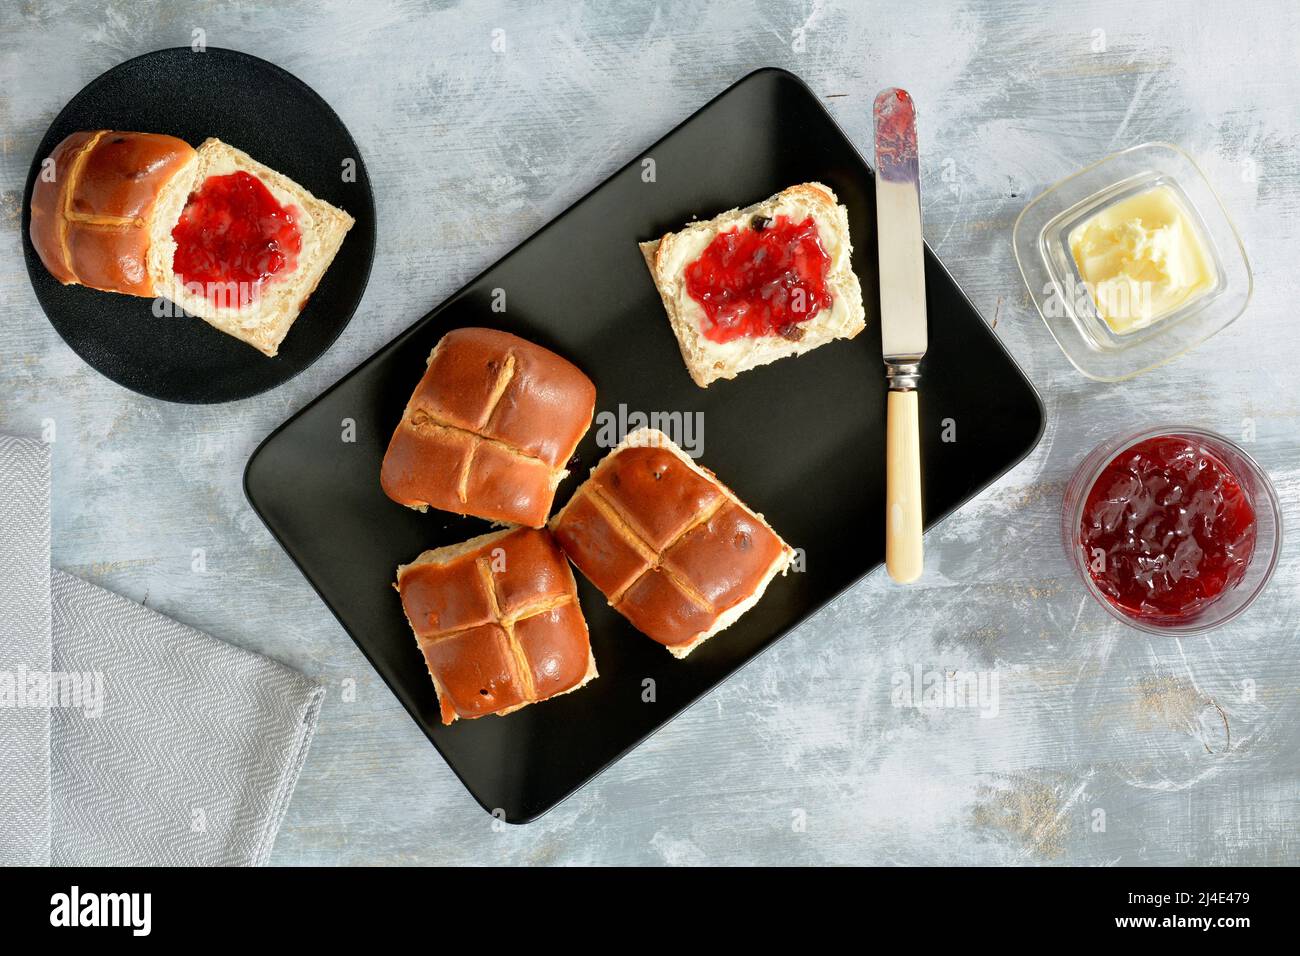 Fresh baked hot cross buns with raspberry jam and butter on black matte plates shot from overhead.  Traditional Easter baked treat. Stock Photo